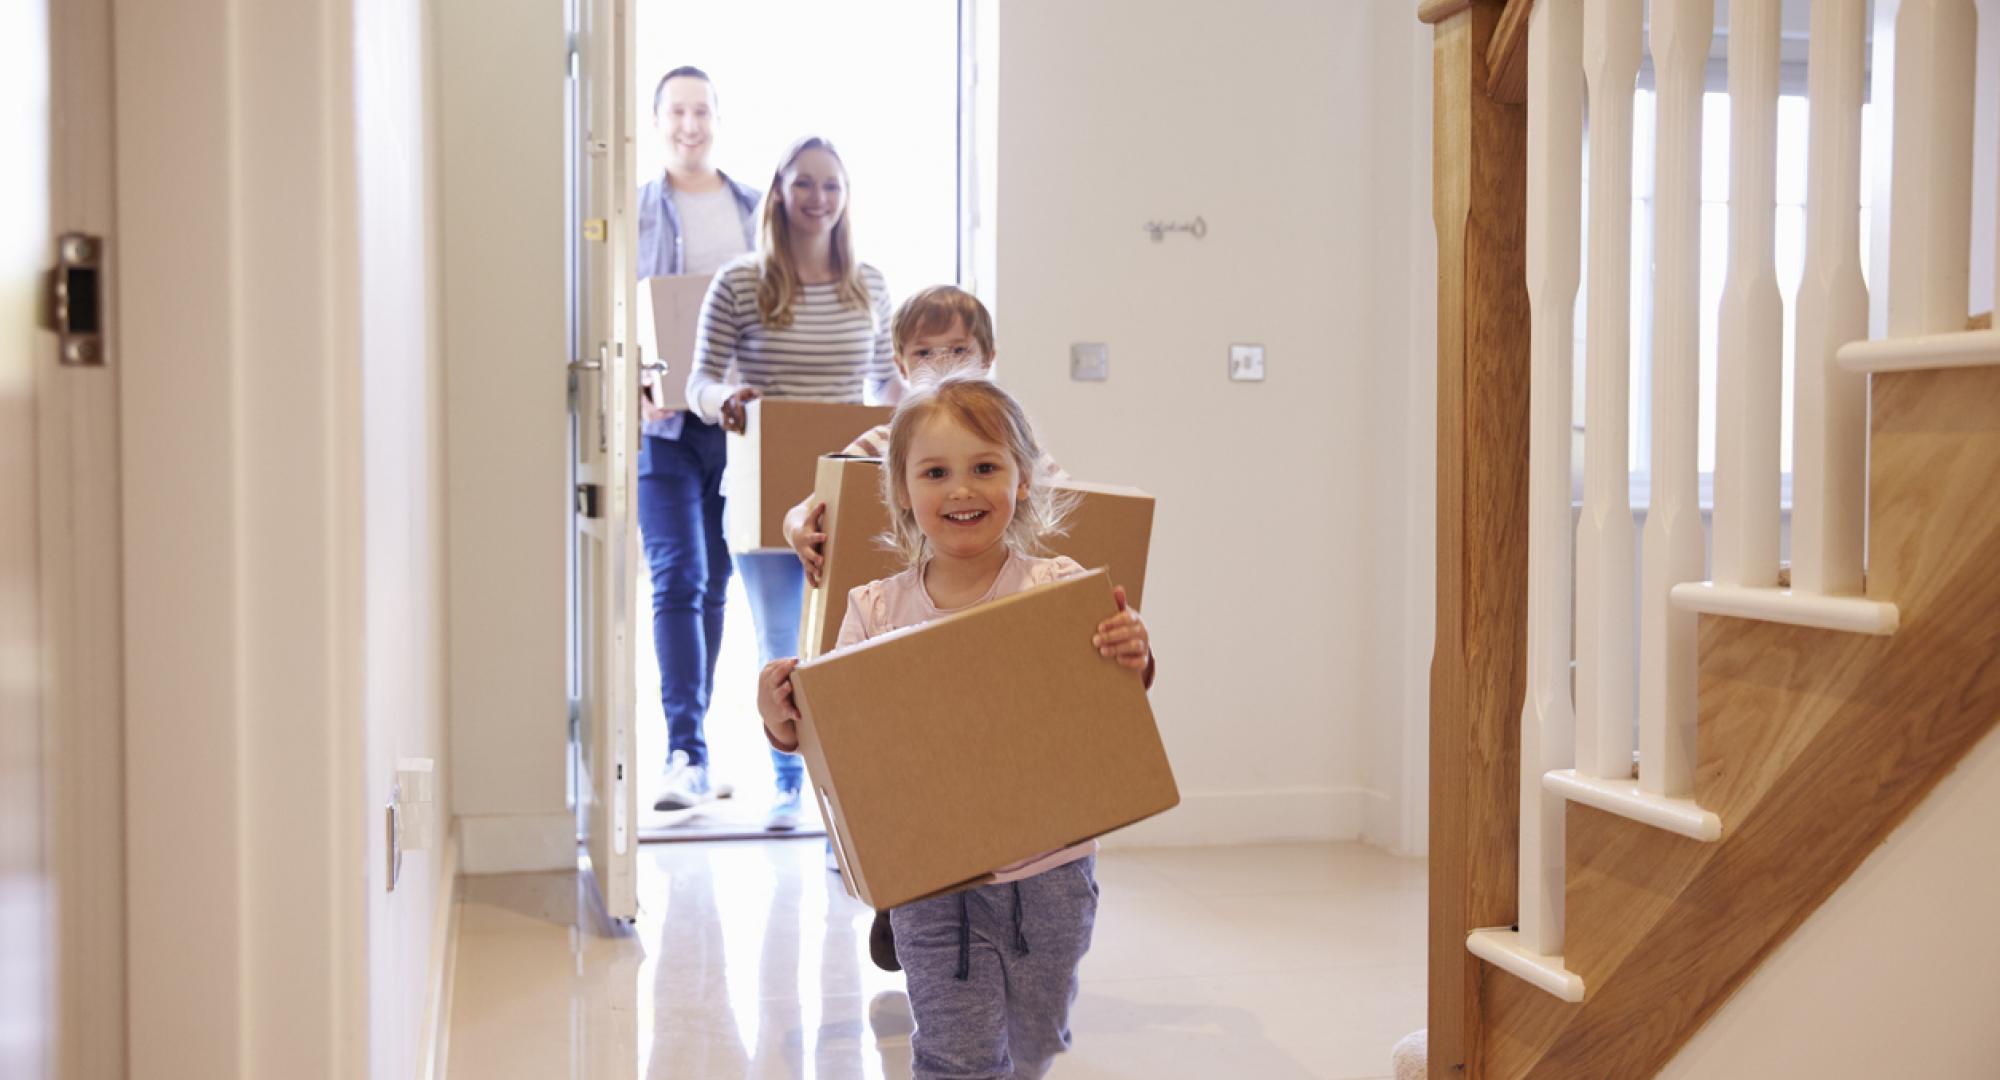 Family moving into a new home